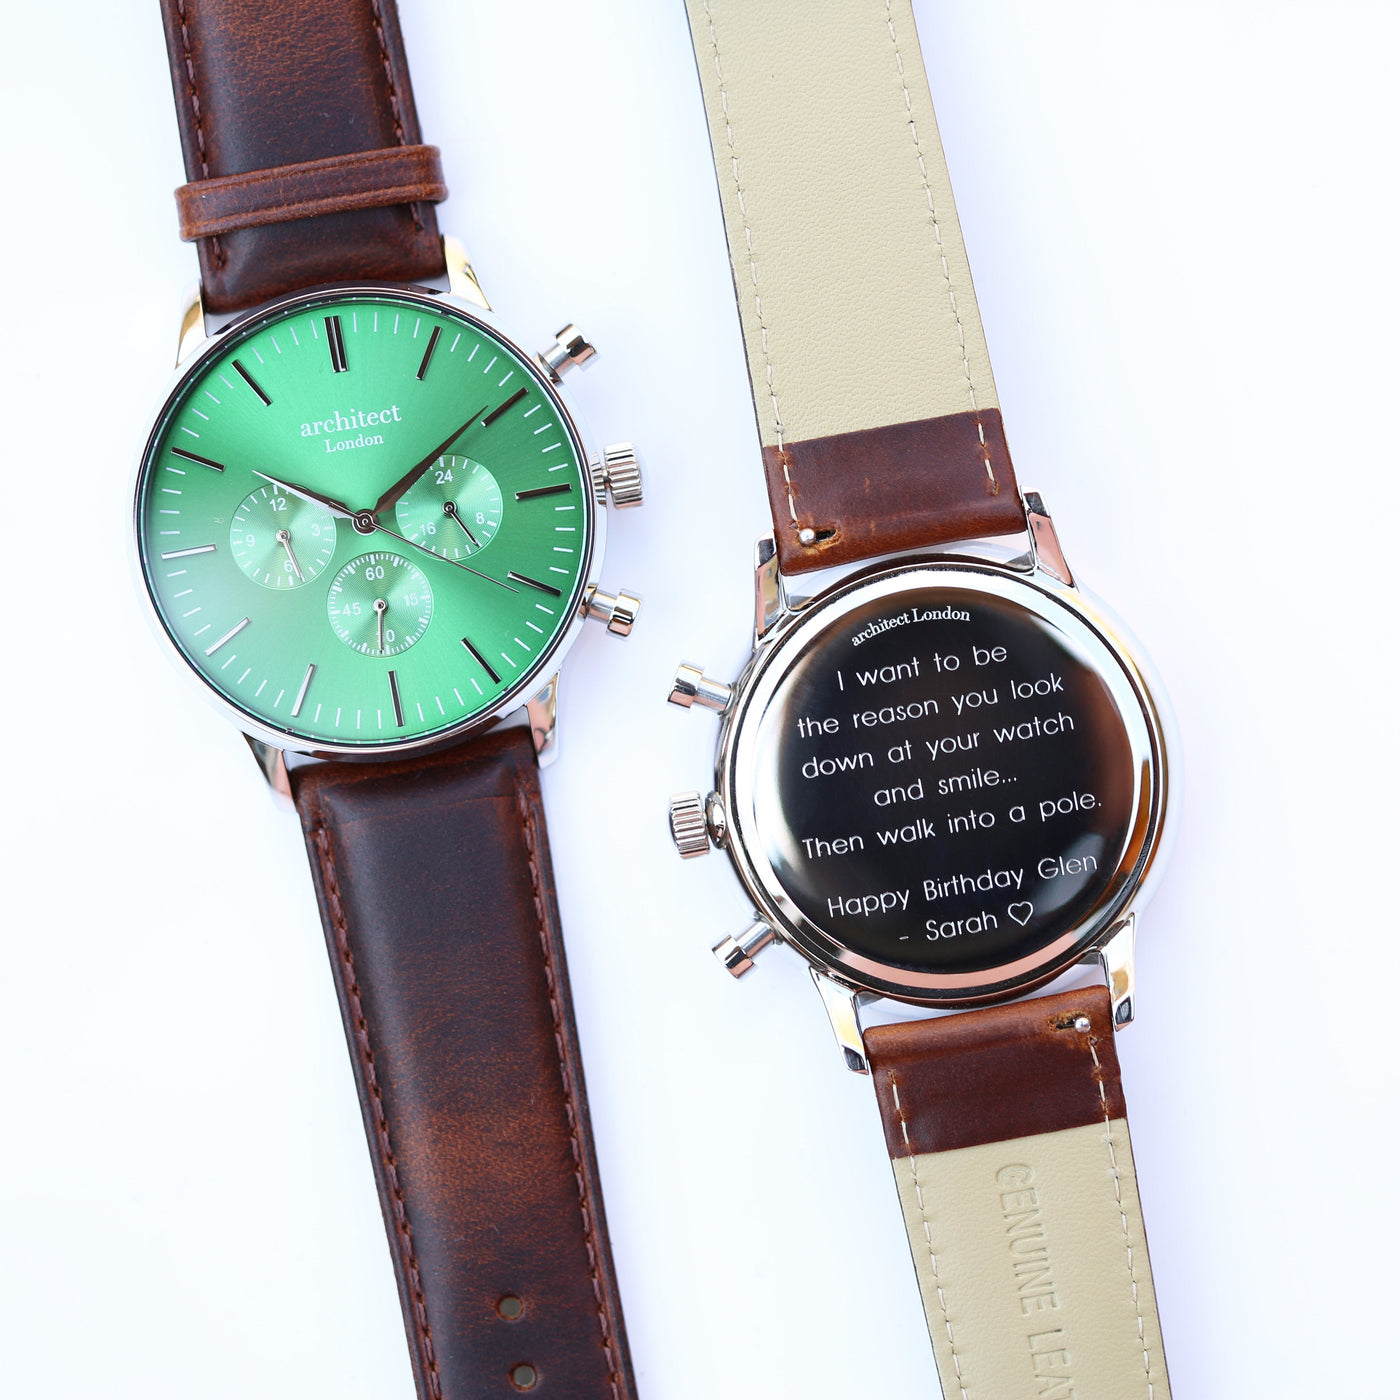 Mens Architect Motivator Watch In Envy Green With Walnut Strap - Modern Font Engraving